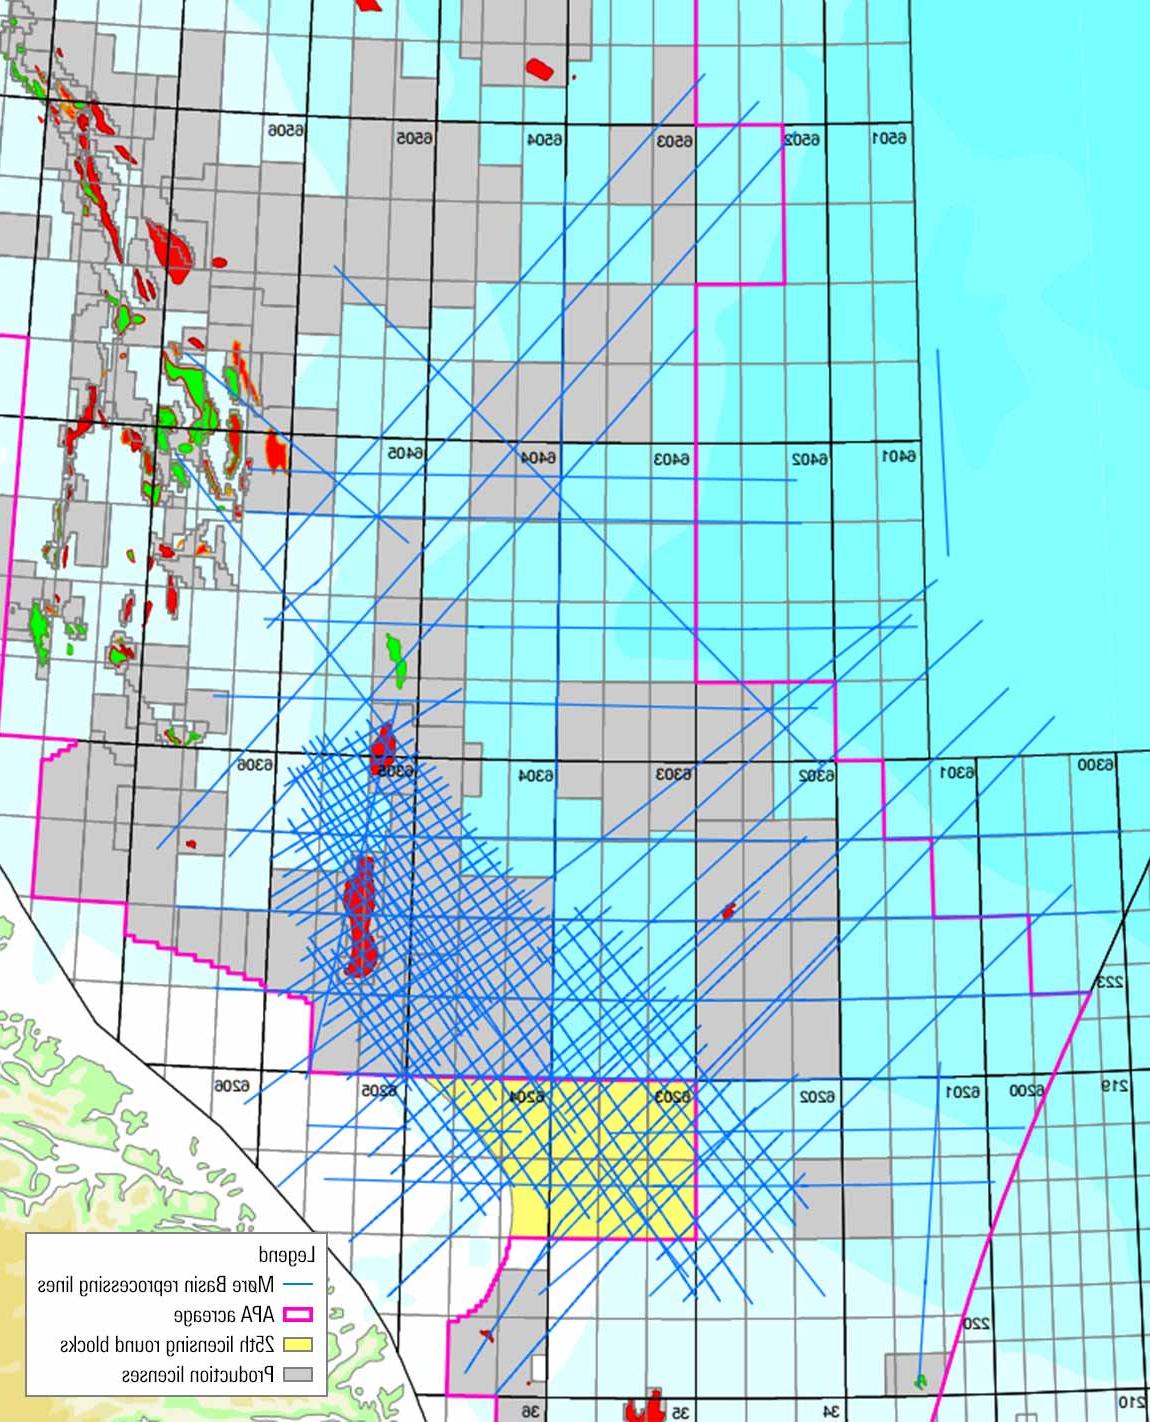 Image showing multiclient reprocessing area of Norwegian Sea’s Møre Basin